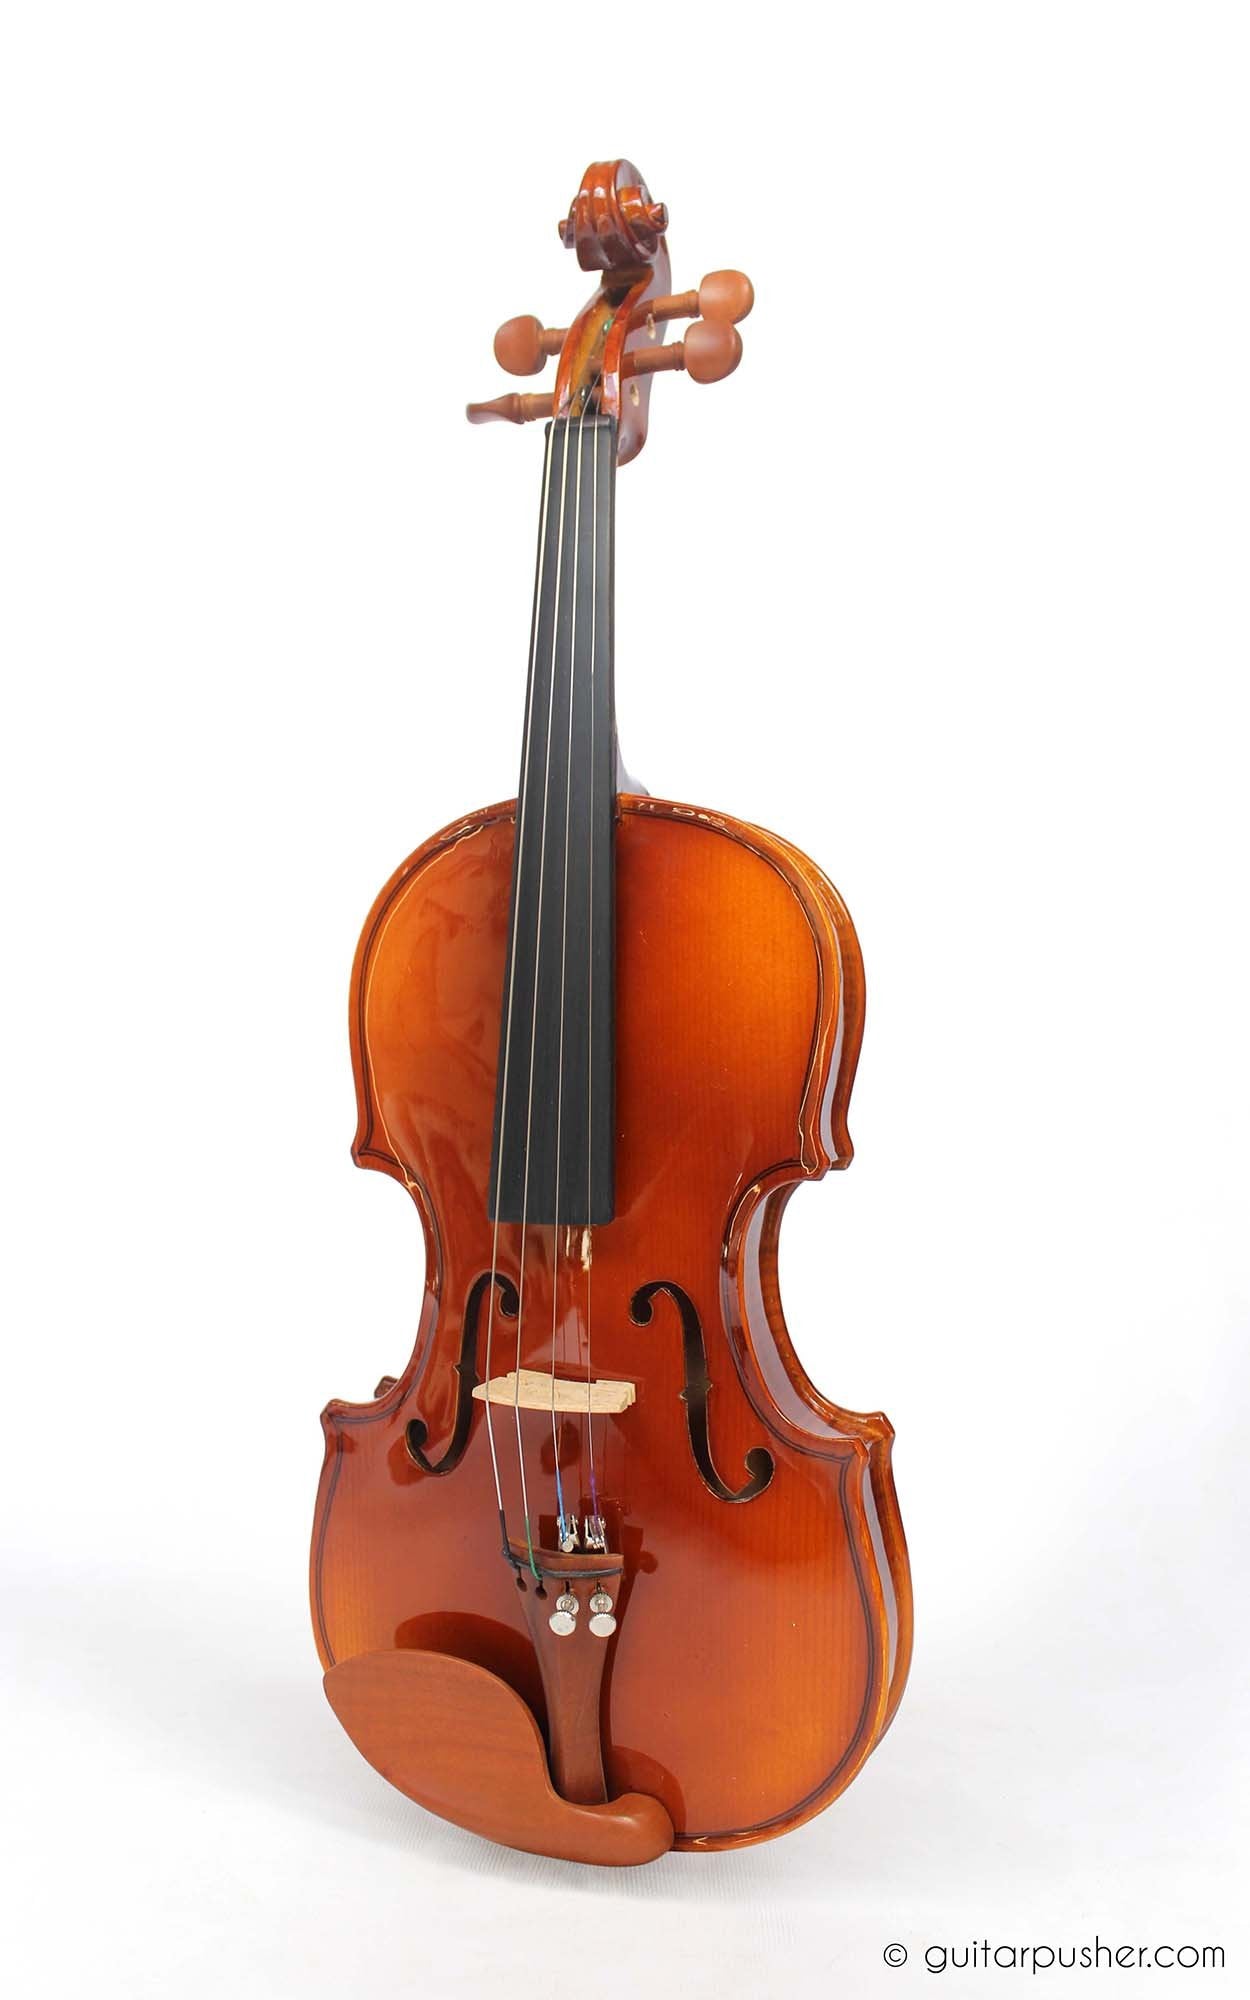 Trevino V401 1/2 Full Solid Wood Violin with Case